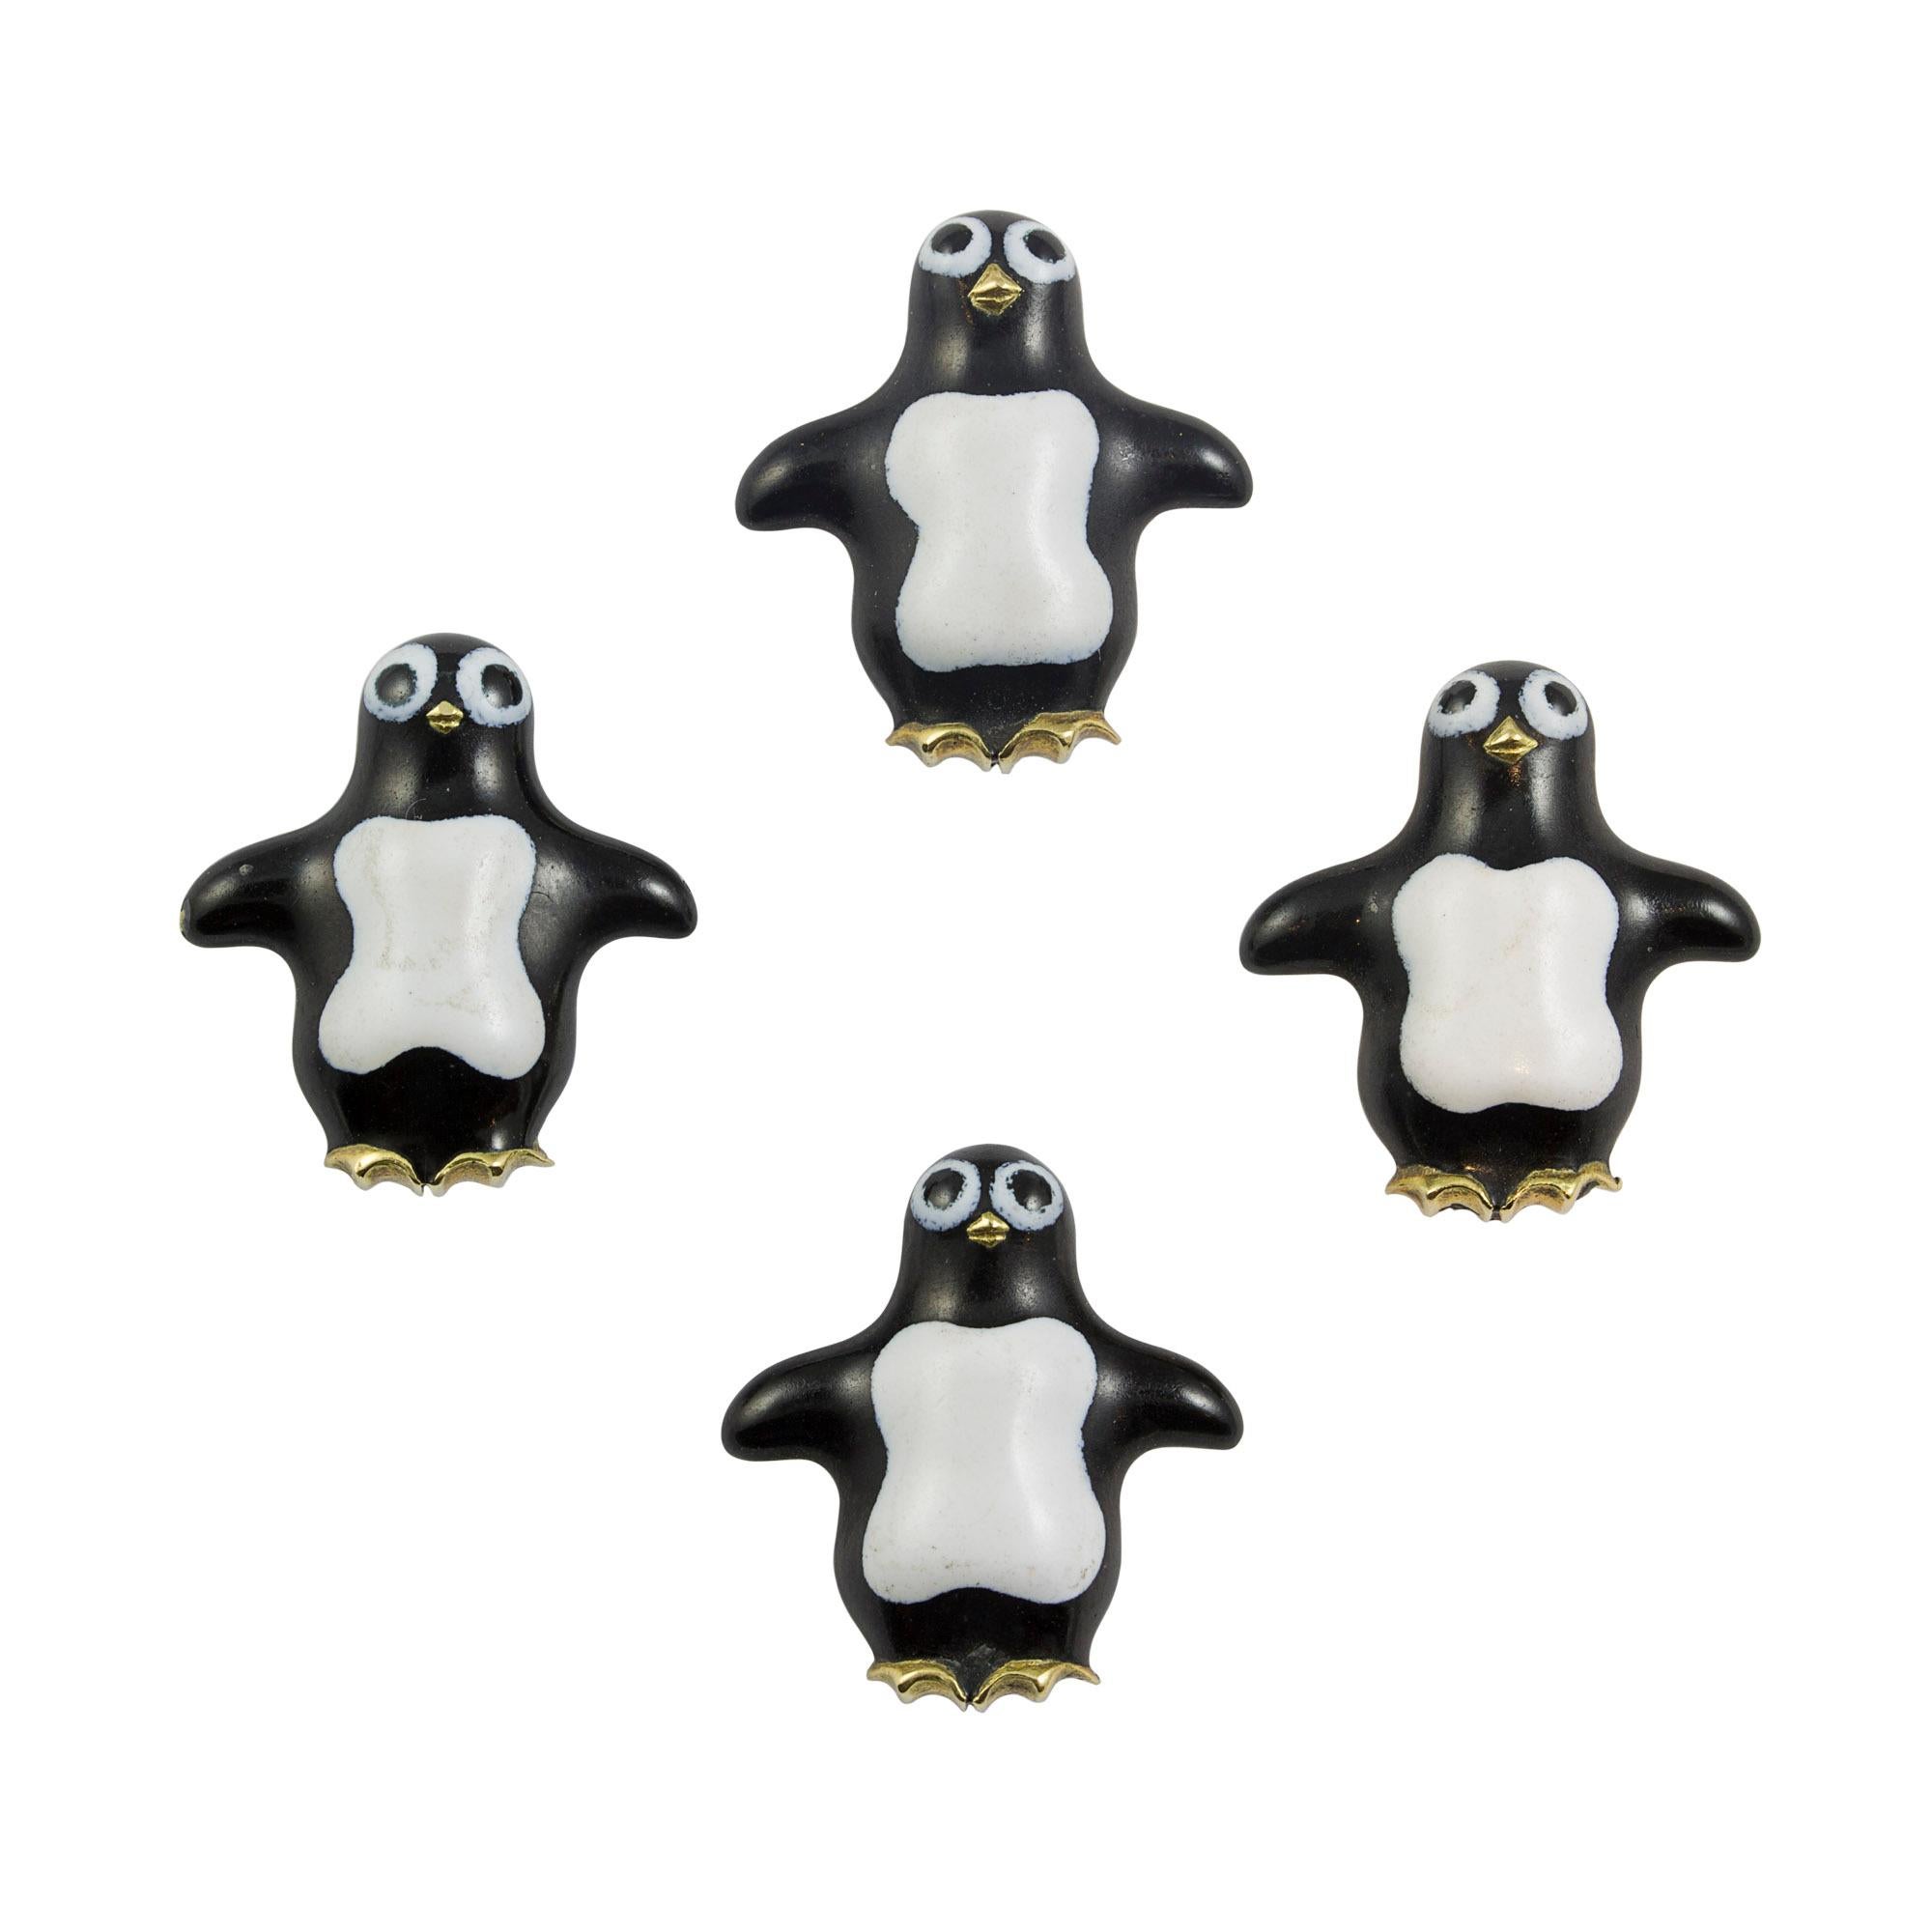 A penguin dress set, the pair of black and white enamel penguin cufflinks accompanied by four matching buttons, all mounted in yellow gold, hallmarked 18ct gold, London 2009, bearing the Bentley & Skinner sponsormark, the large links measuring